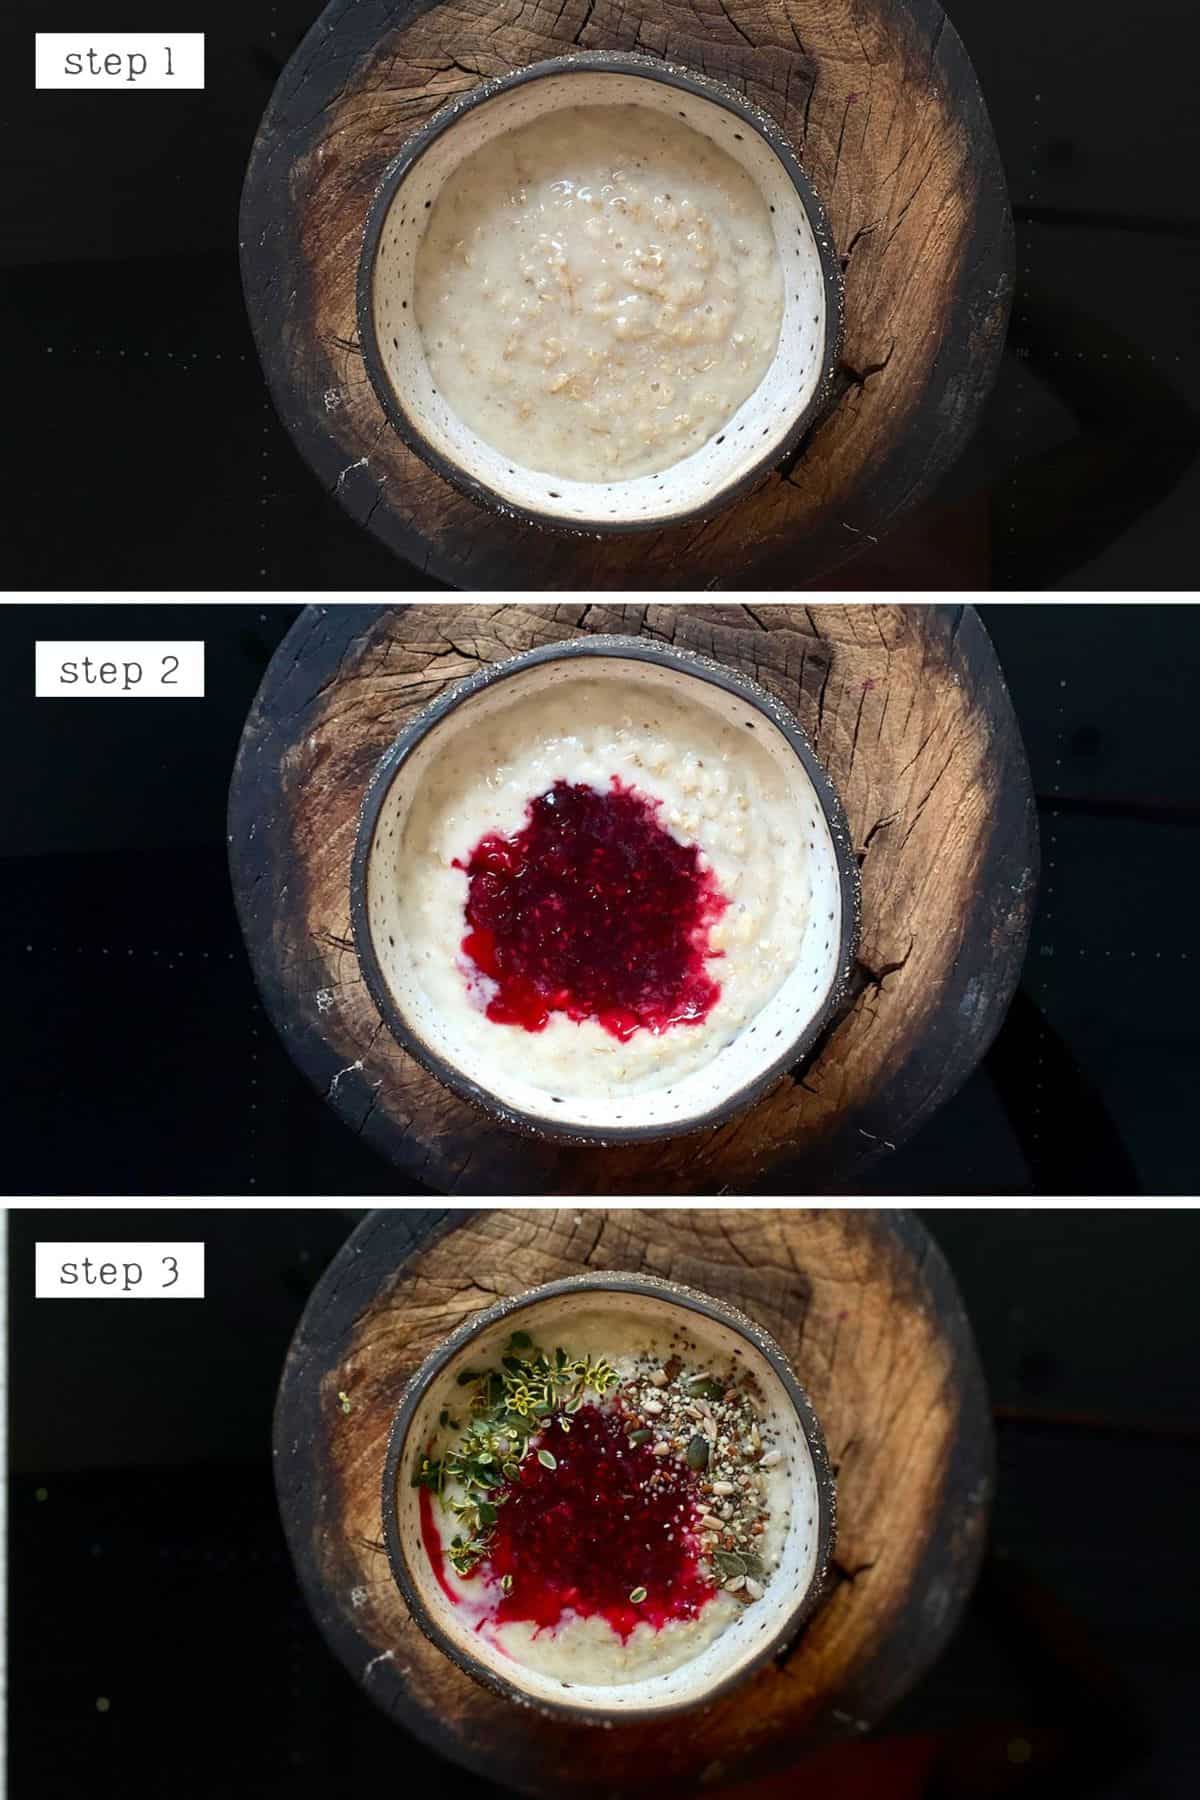 Steps for mixing oatmeal and compote